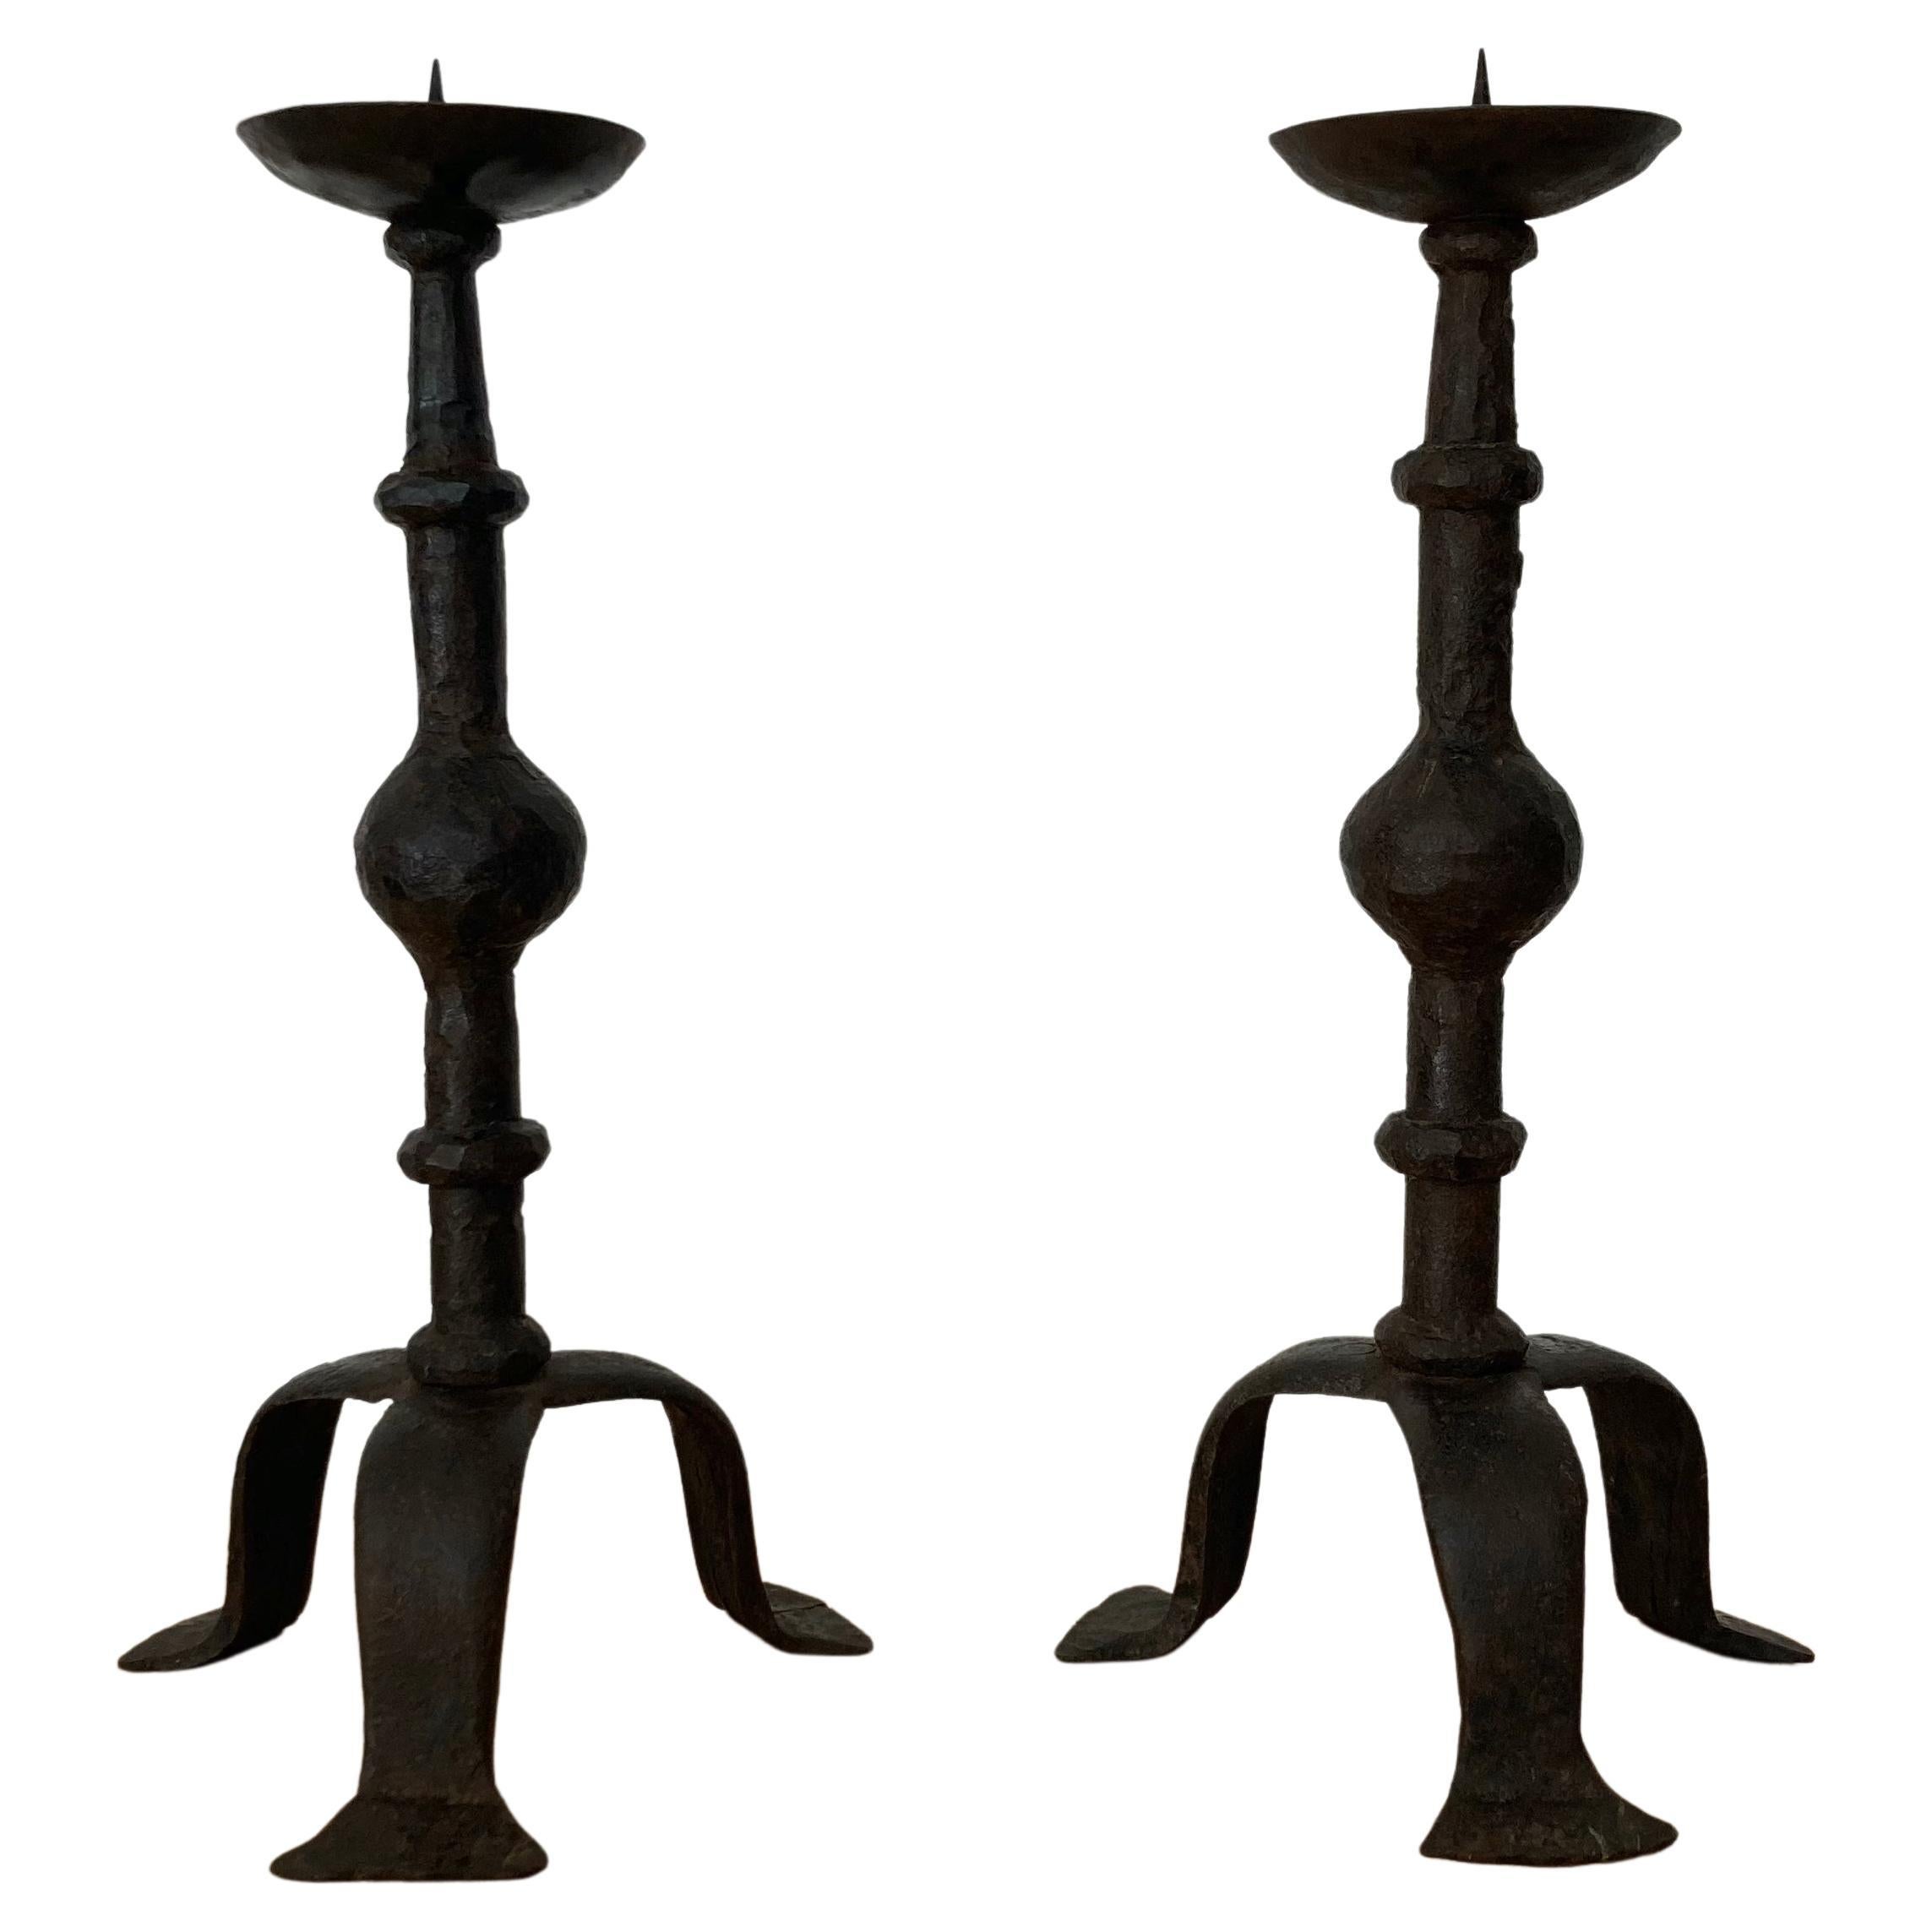 Forged Hammered Iron Candlesticks in the Style of Giacometti, France, 1950s